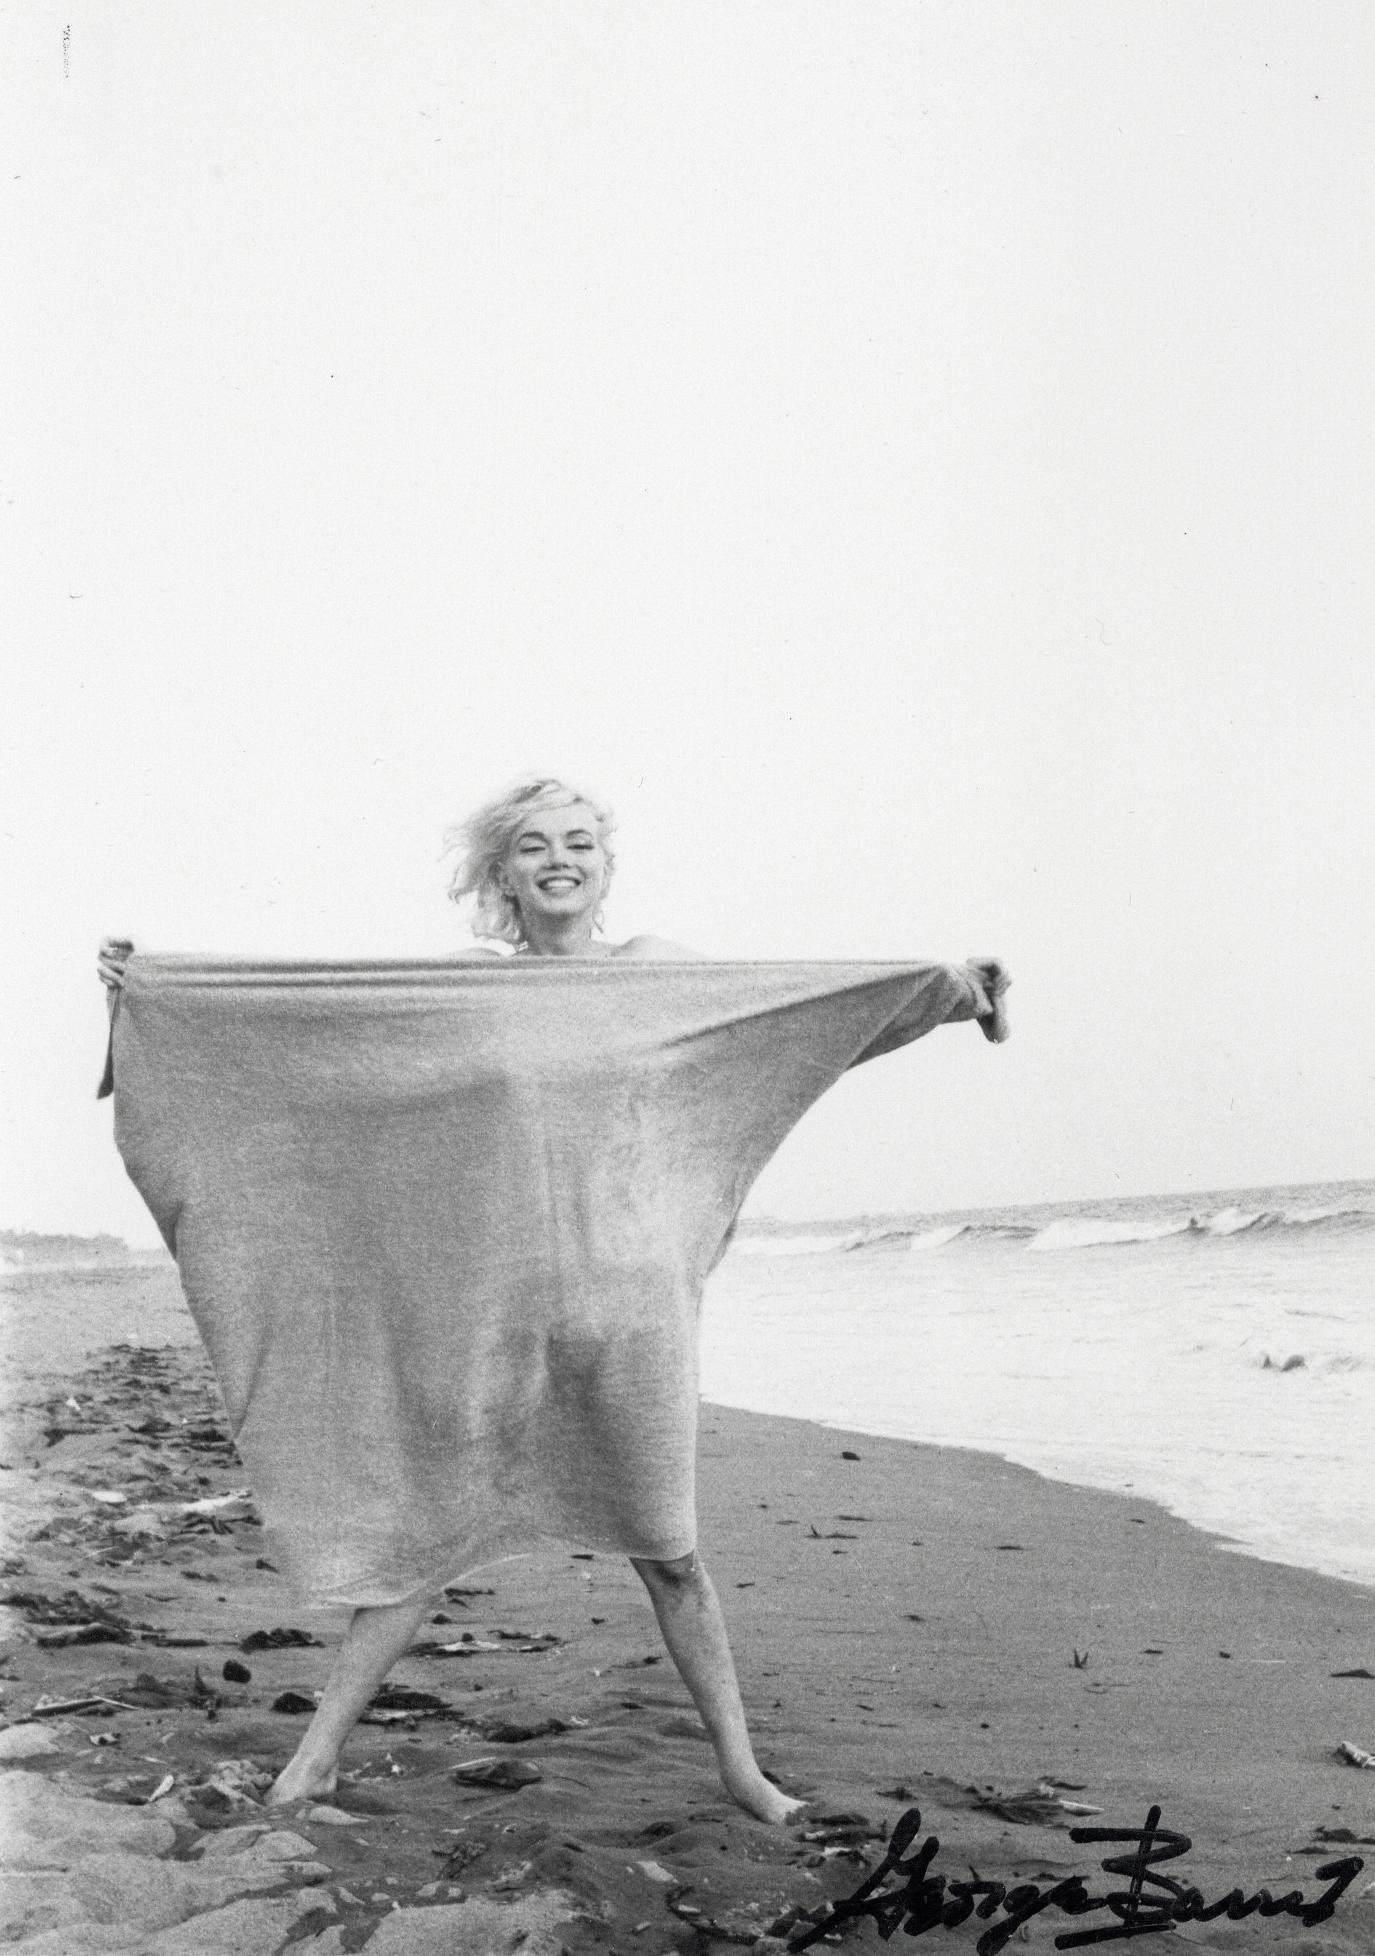 George Barris Black and White Photograph - Marilyn Monroe on the Beach Vintage Original Photograph